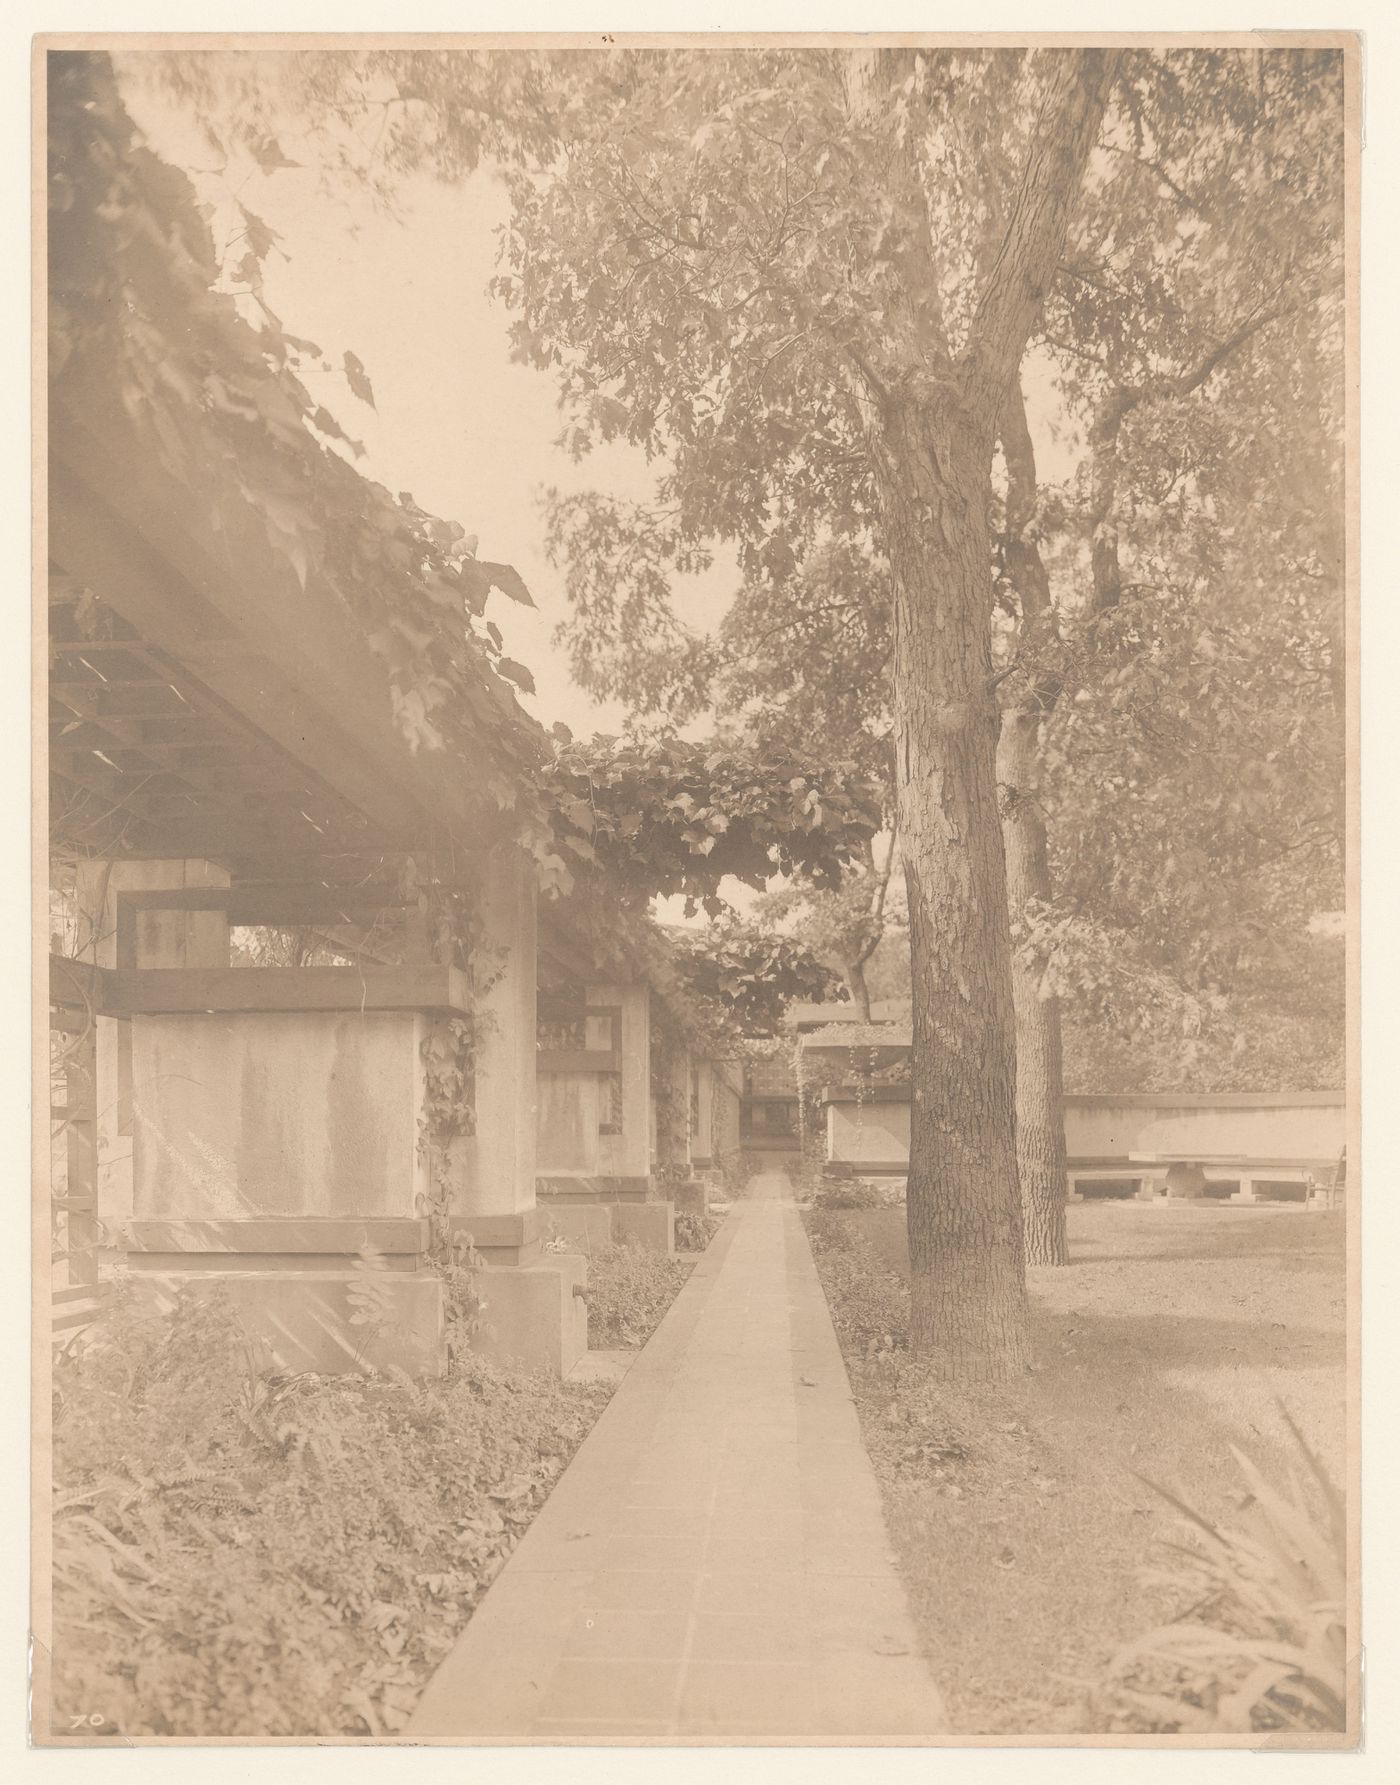 View of Coonley House from a path, Riverside, Illinois